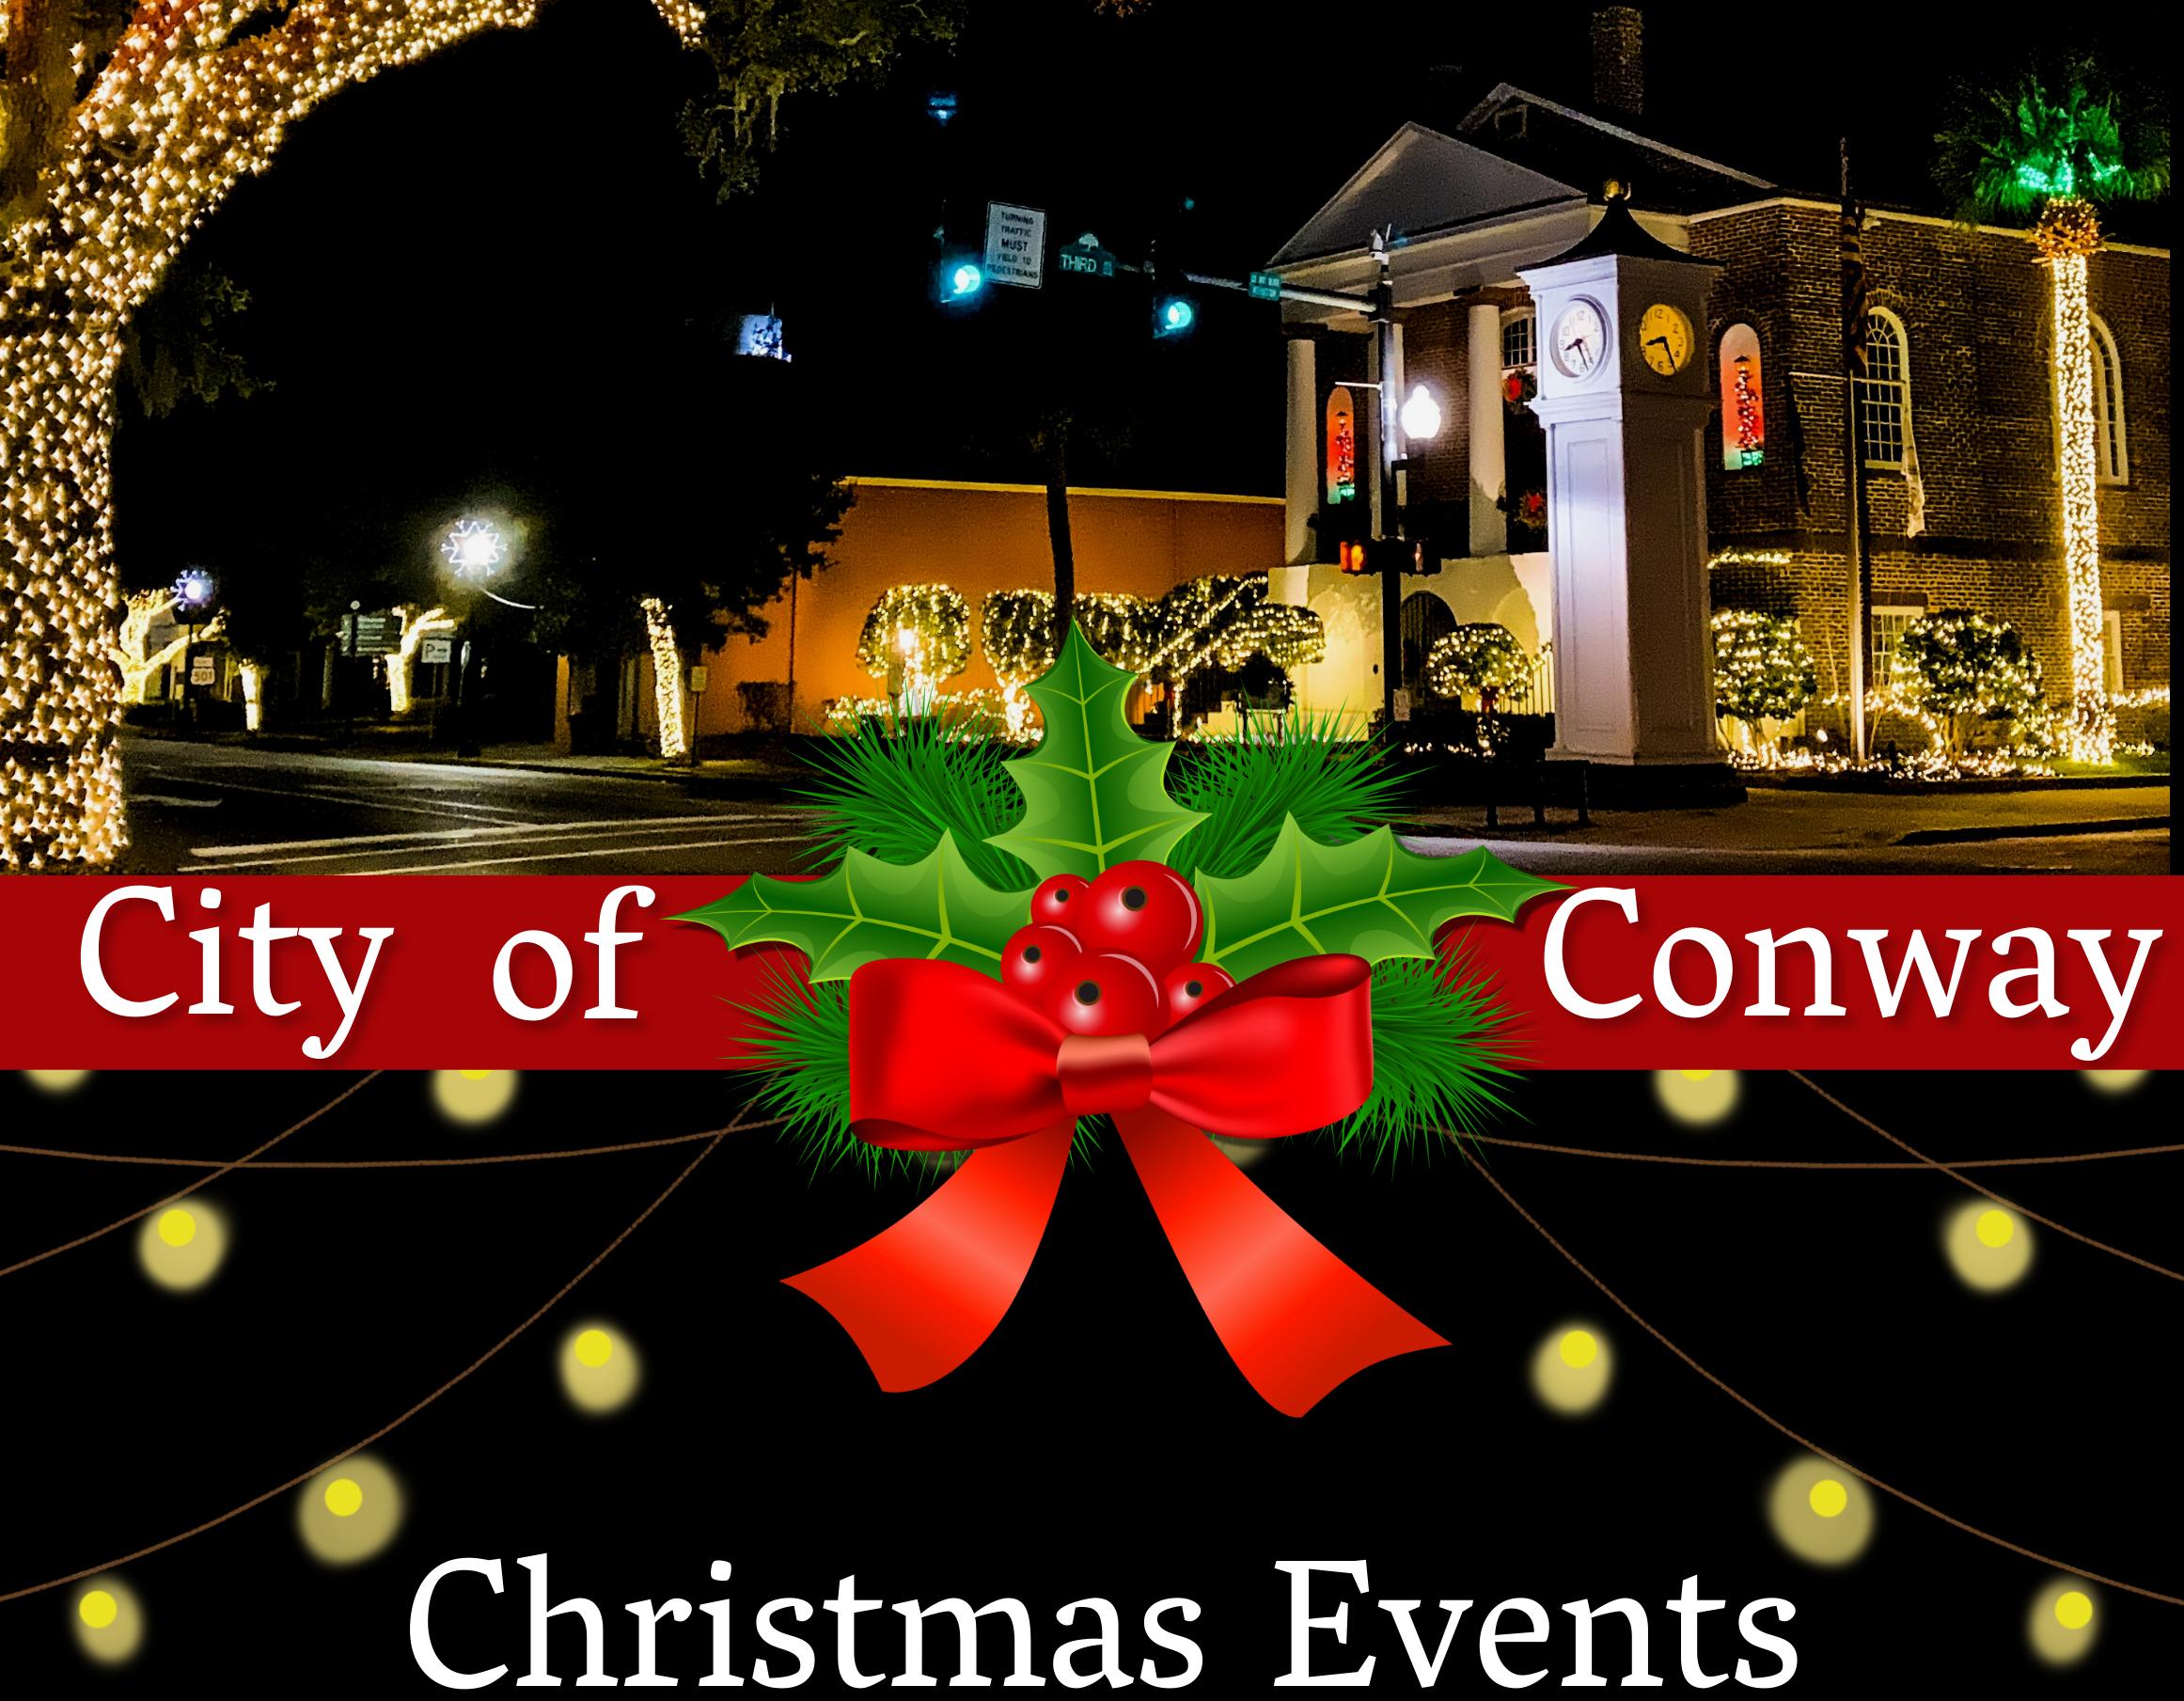 Conway Christmas Events - Copy